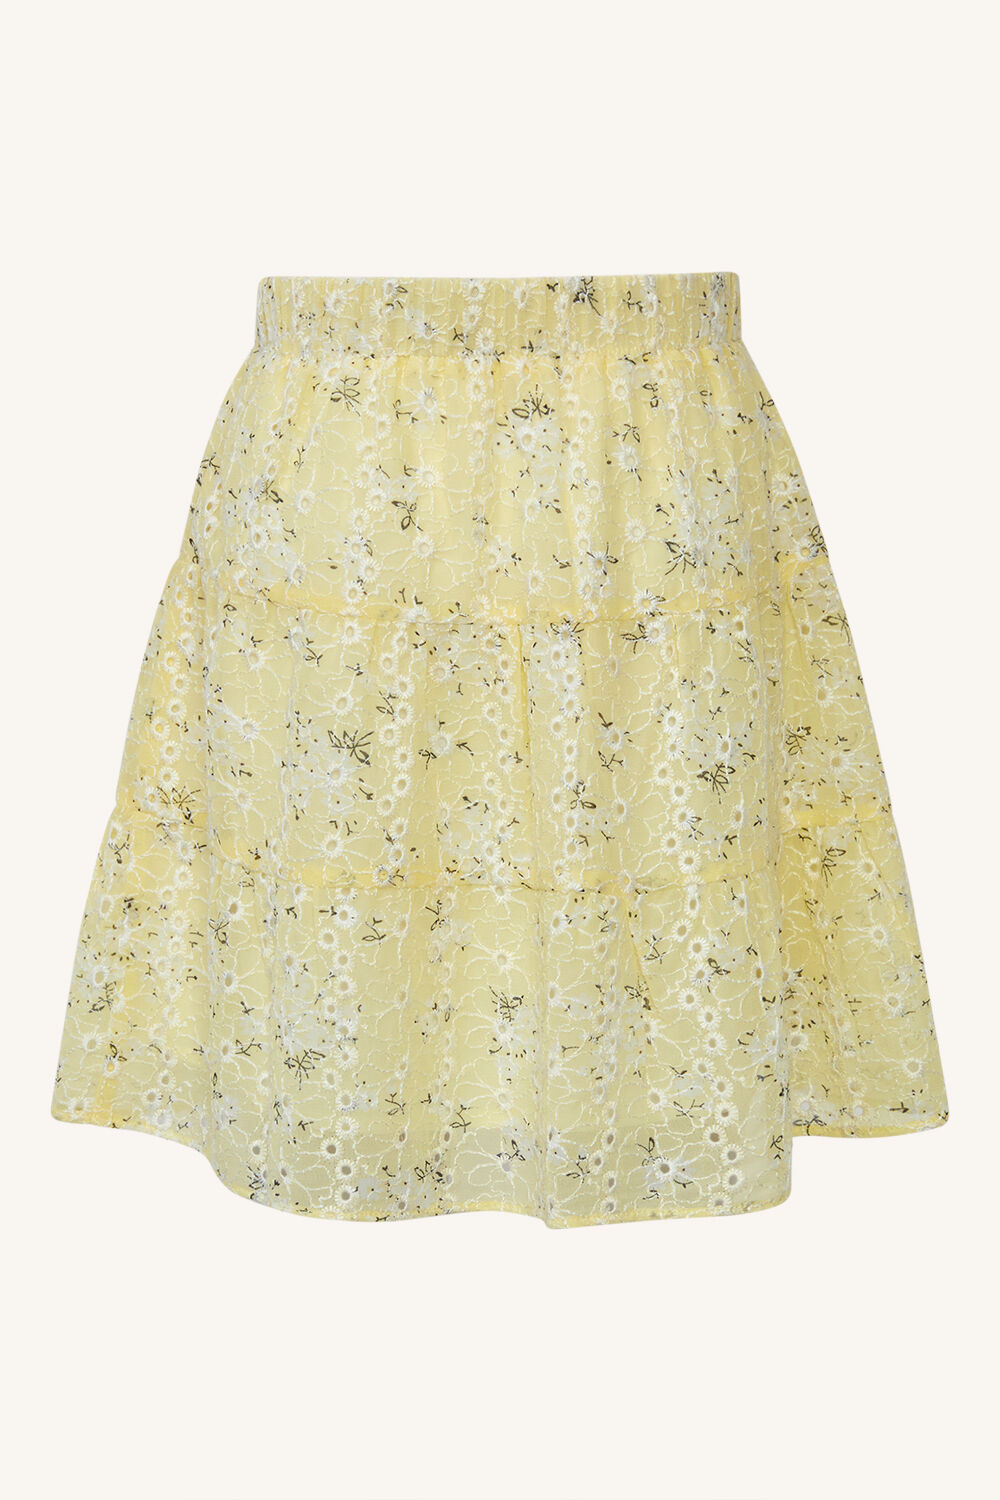 GIRLS ELLA TIERED SKIRT in colour PASTEL YELLOW